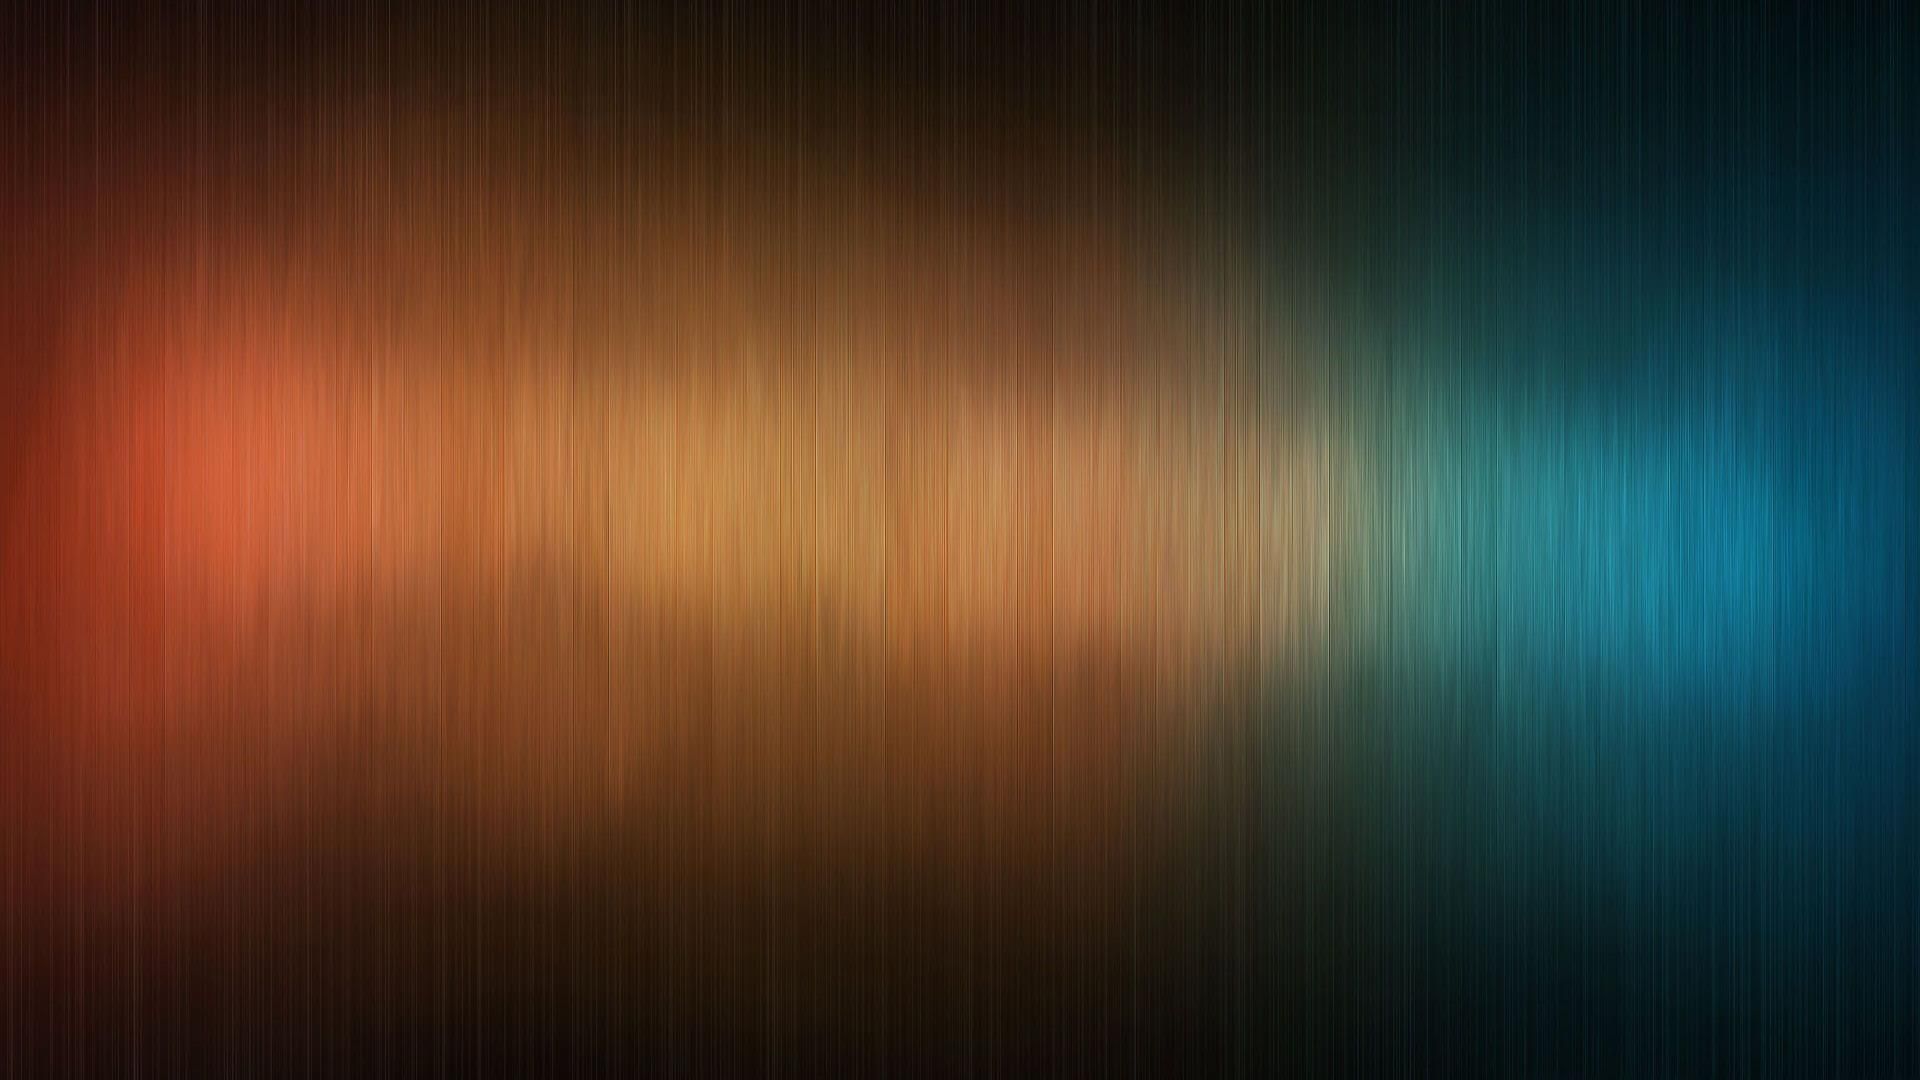 HD Images For Backgrounds